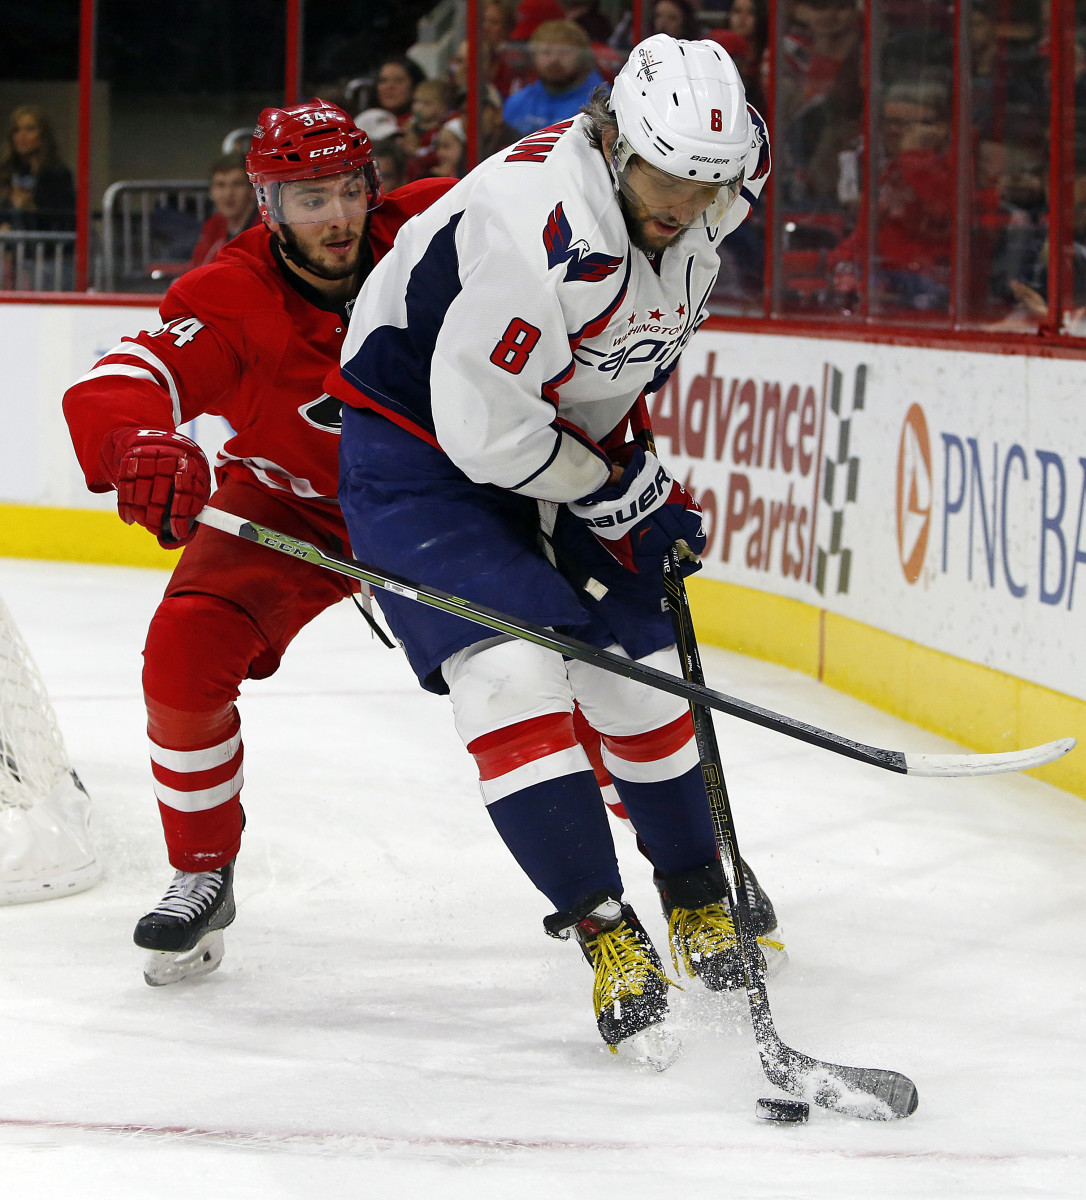 Capitals win 6th straight game, beat Hurricanes 2-1 - Sports Illustrated